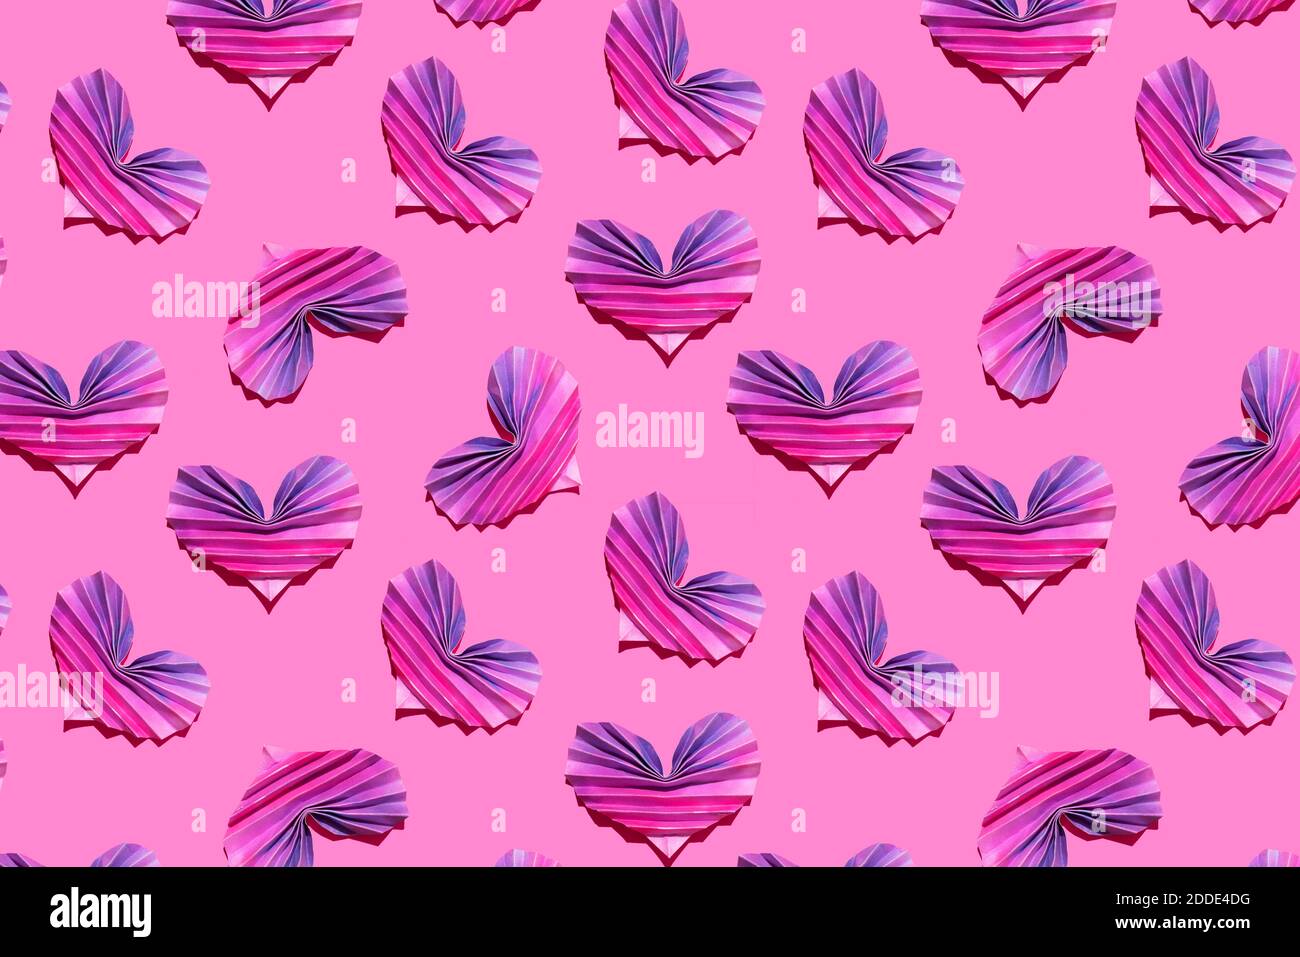 Pattern of pink and purple origami hearts Stock Photo